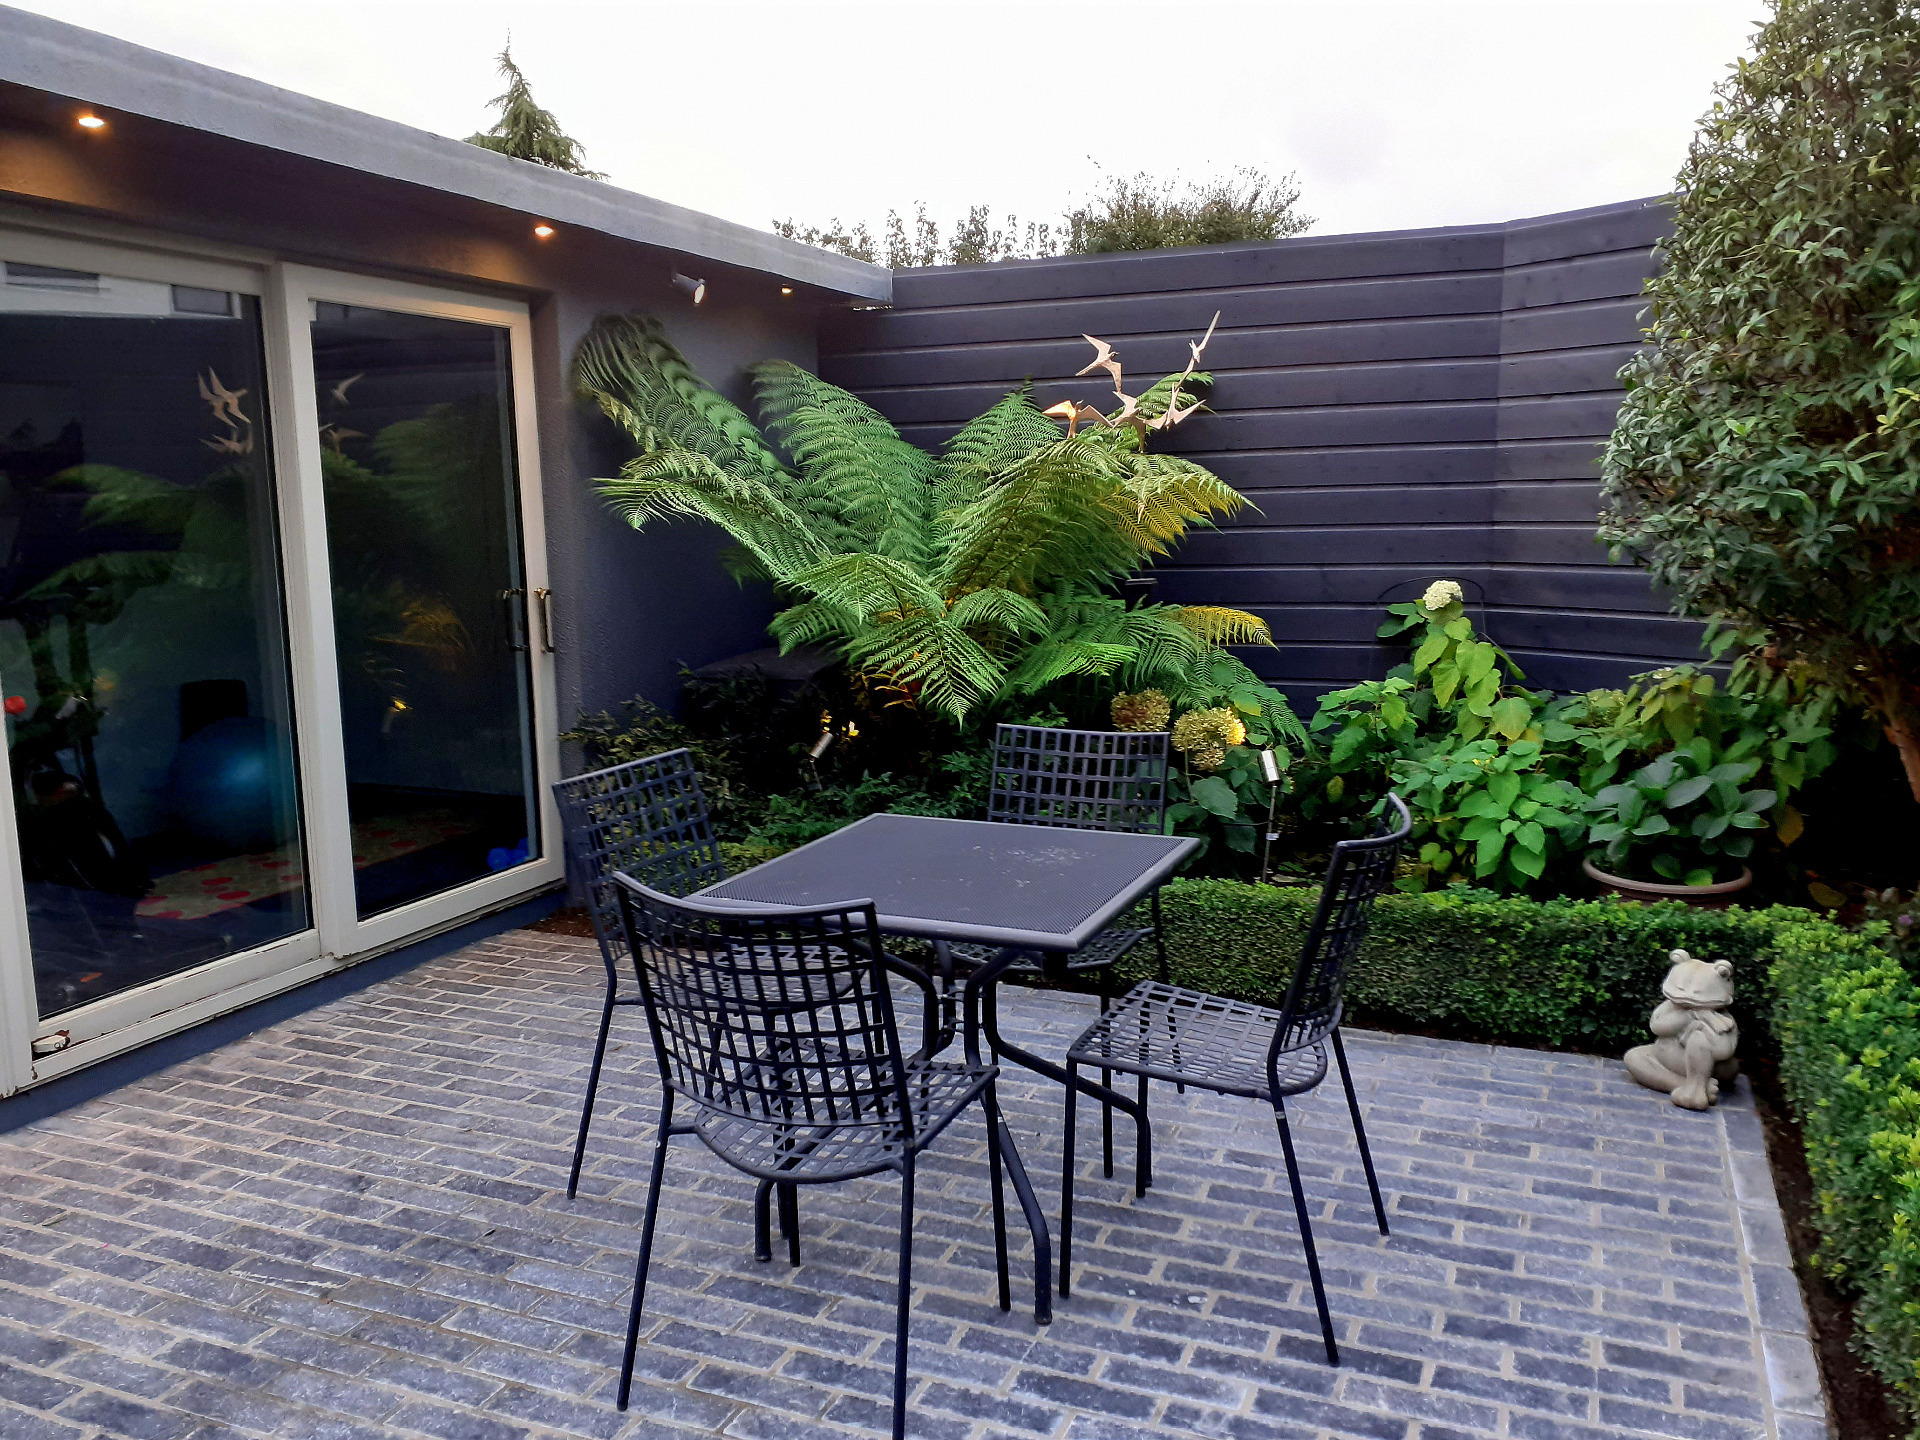 Garden Design & Landscaping in Terenure including custom made Garden Fencing, Biohort Steel Planters, Blue Limestone paving, Biohort Garden Shed,  Artificial Grass - durable finishes, low maintenance, trouble free performance